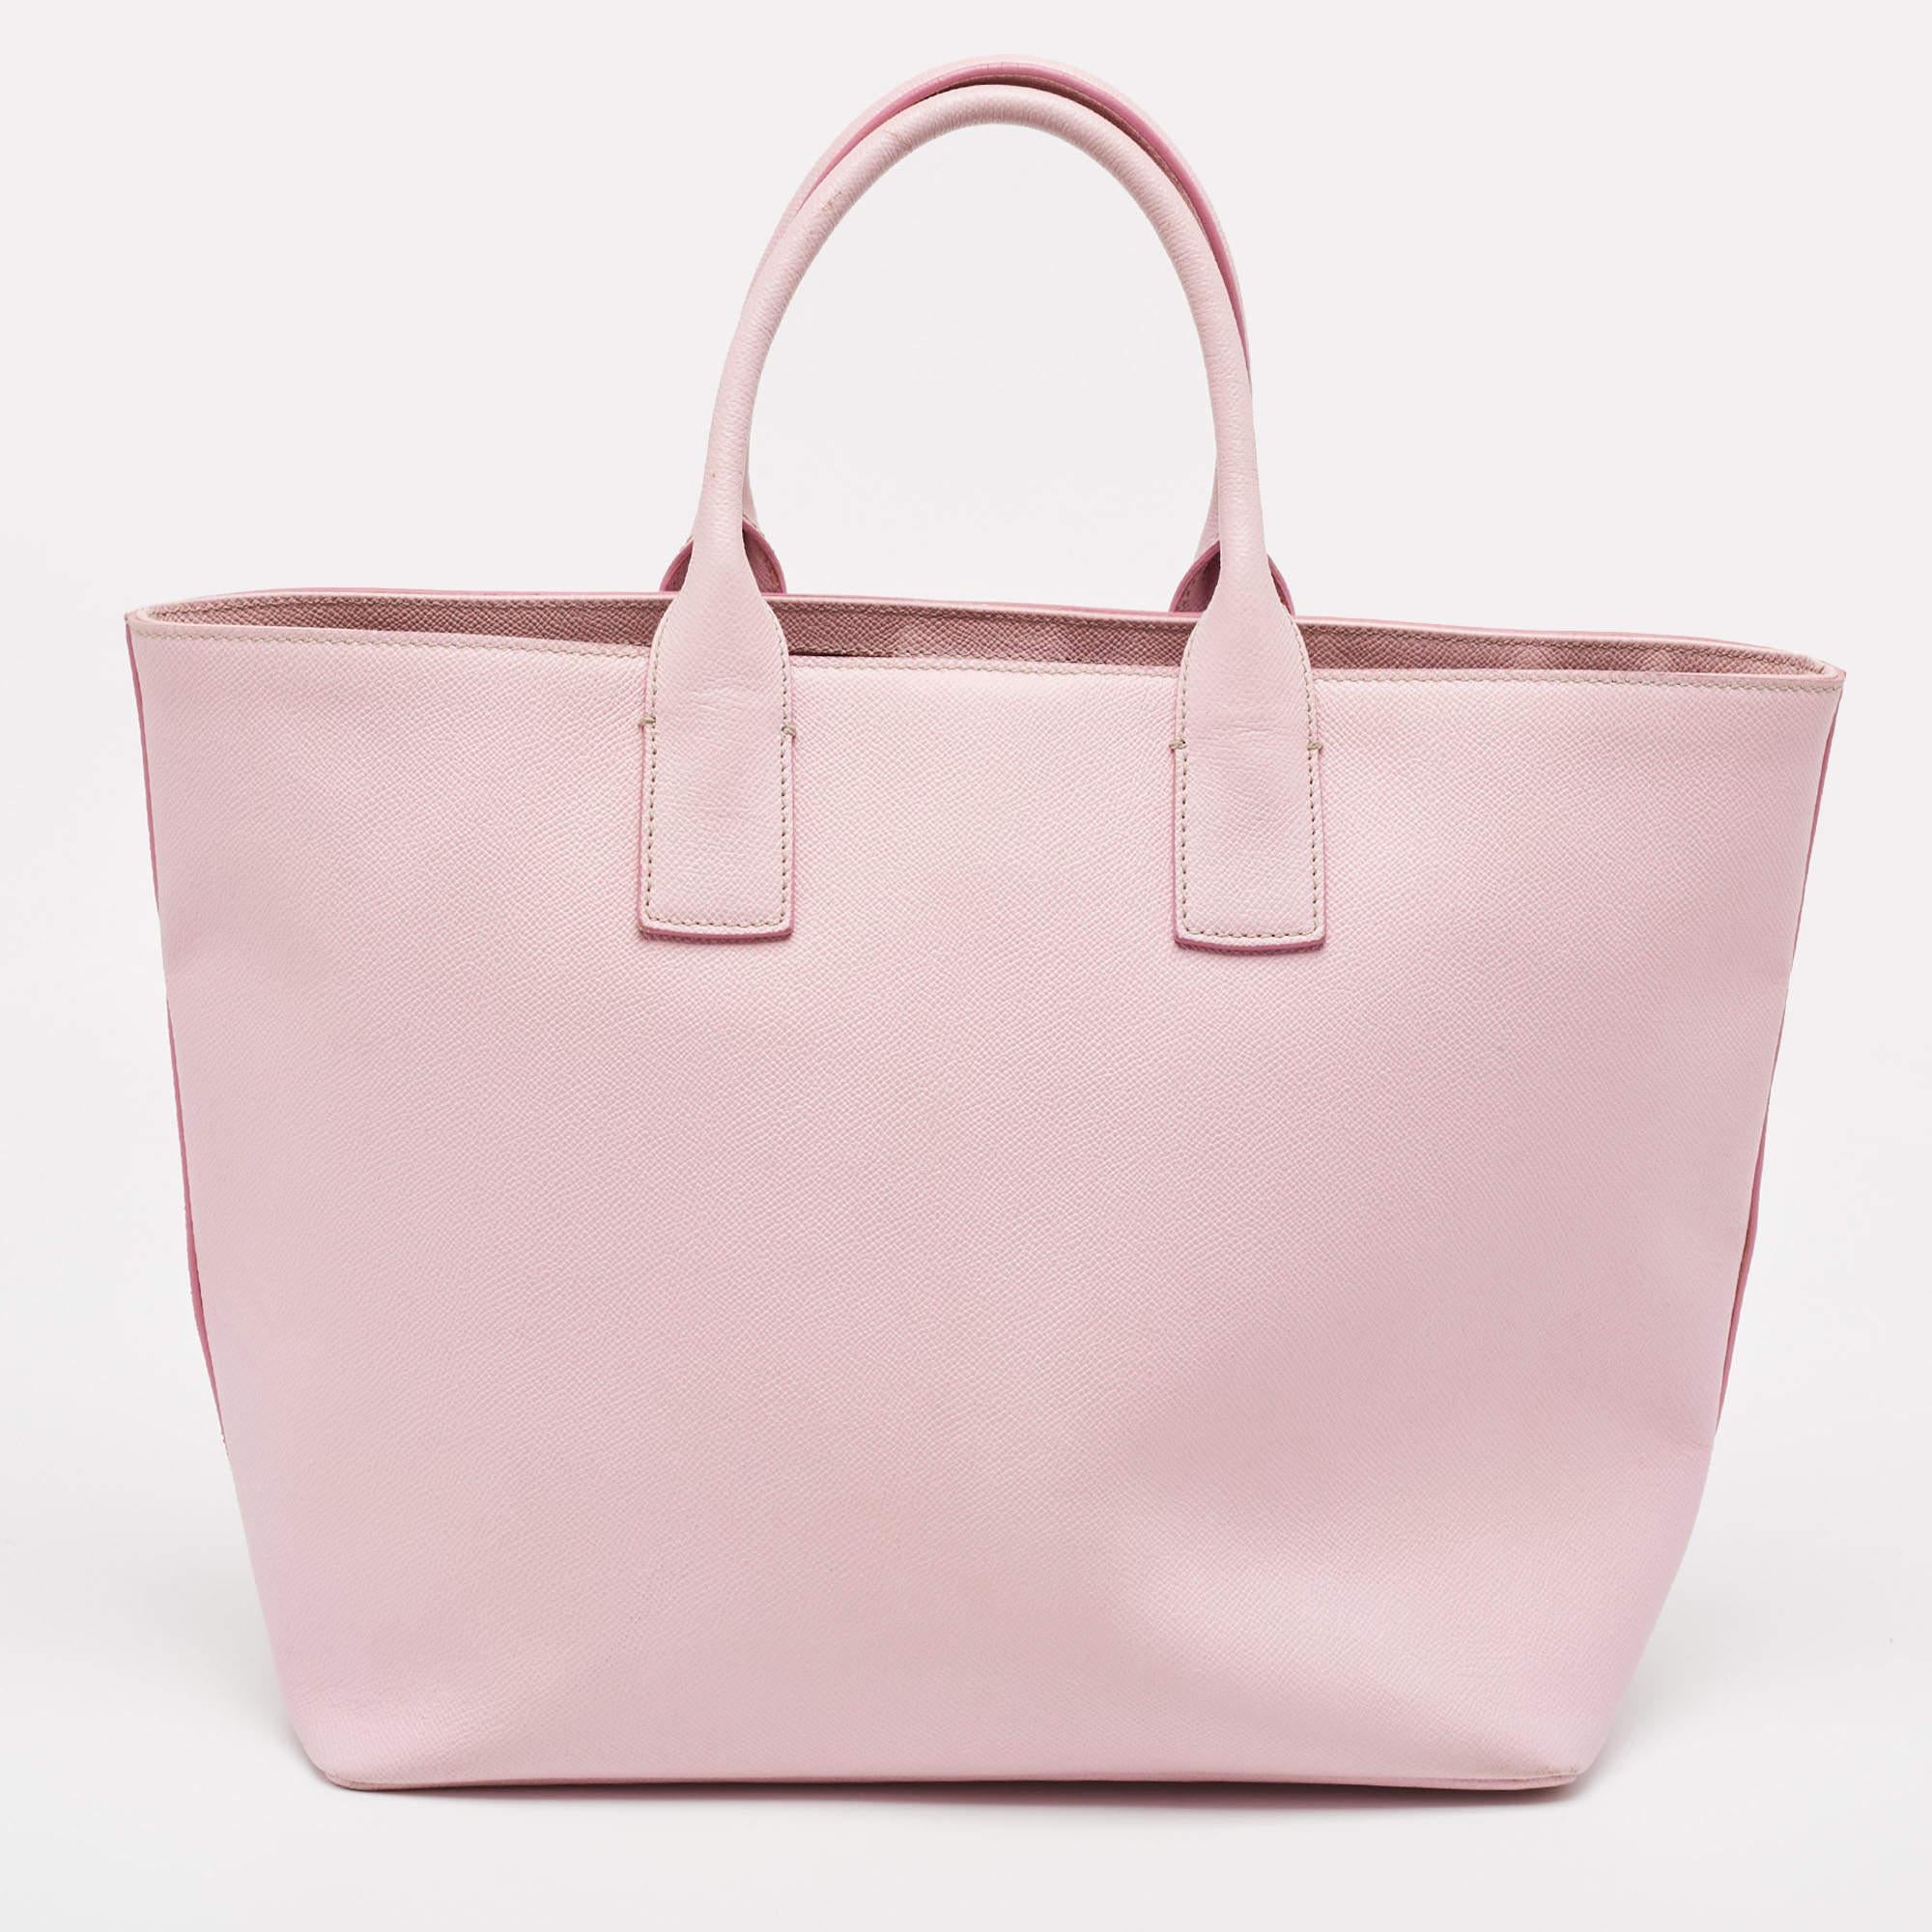 Dolce & Gabbana Pink Leather Miss Escape Tote For Sale 8